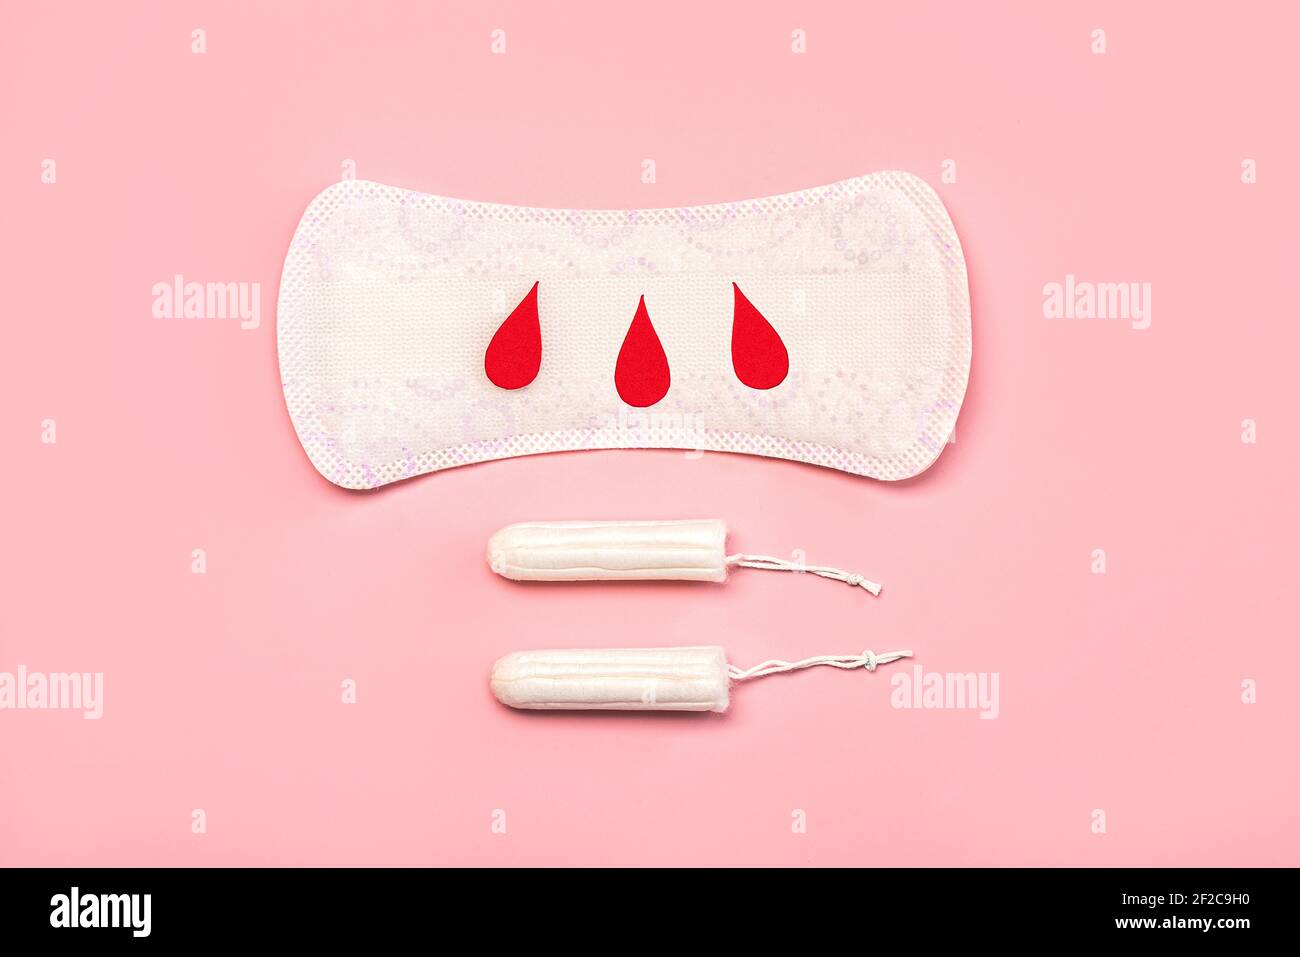 https://c8.alamy.com/comp/2F2C9H0/menstrual-sanitary-pads-or-napkins-with-paper-blood-drops-on-pink-backgroundfemale-intimate-gynecological-hygiene-concept-2F2C9H0.jpg